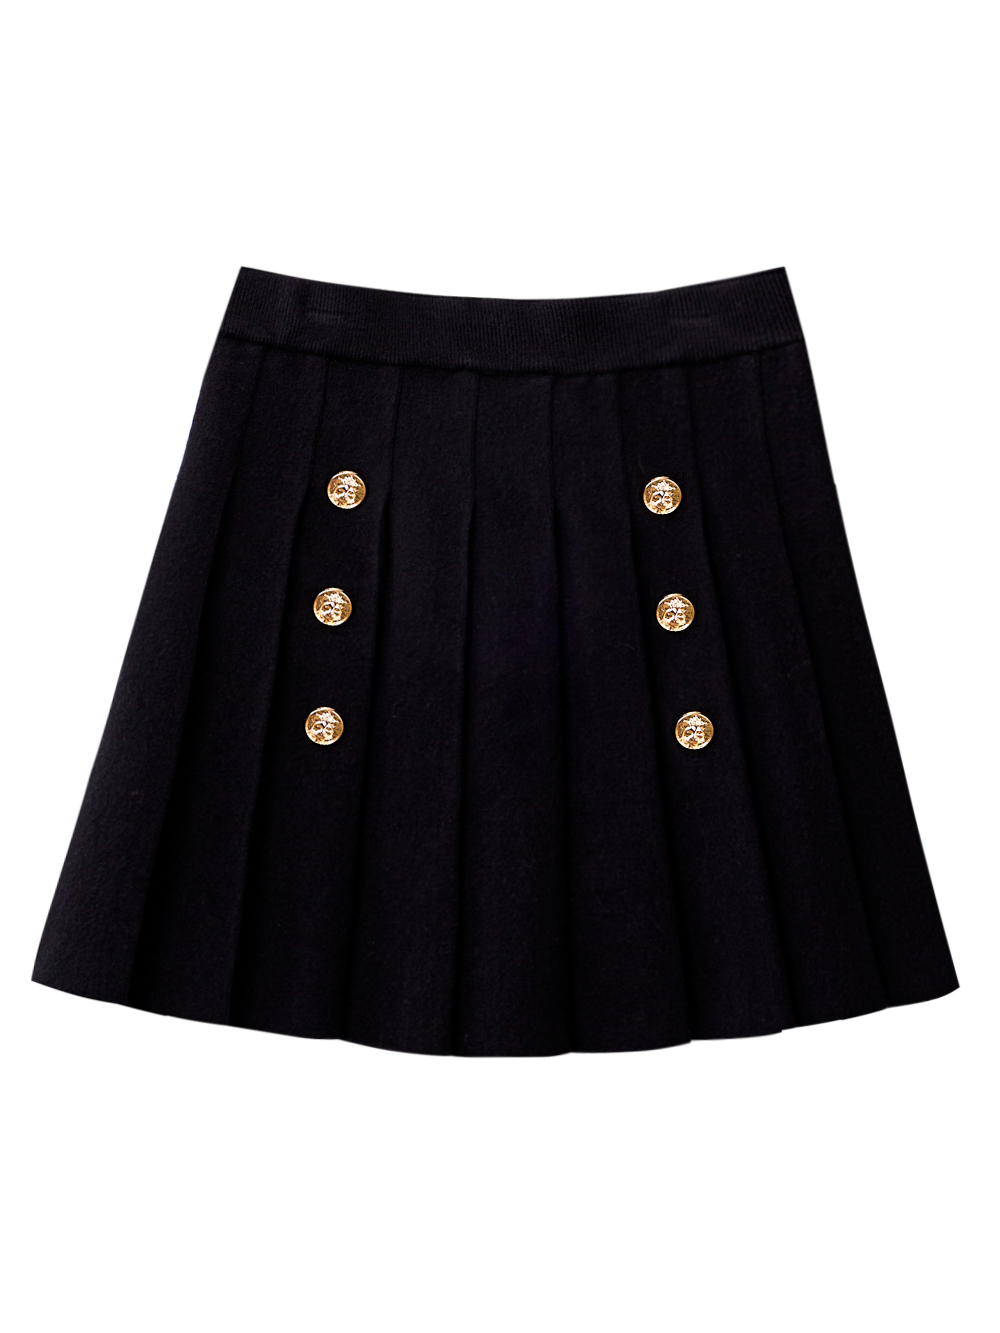 UTAA Gold Scudo Ring Panther Knit Flare Skirt  :  Black (UC4SKF166BK)